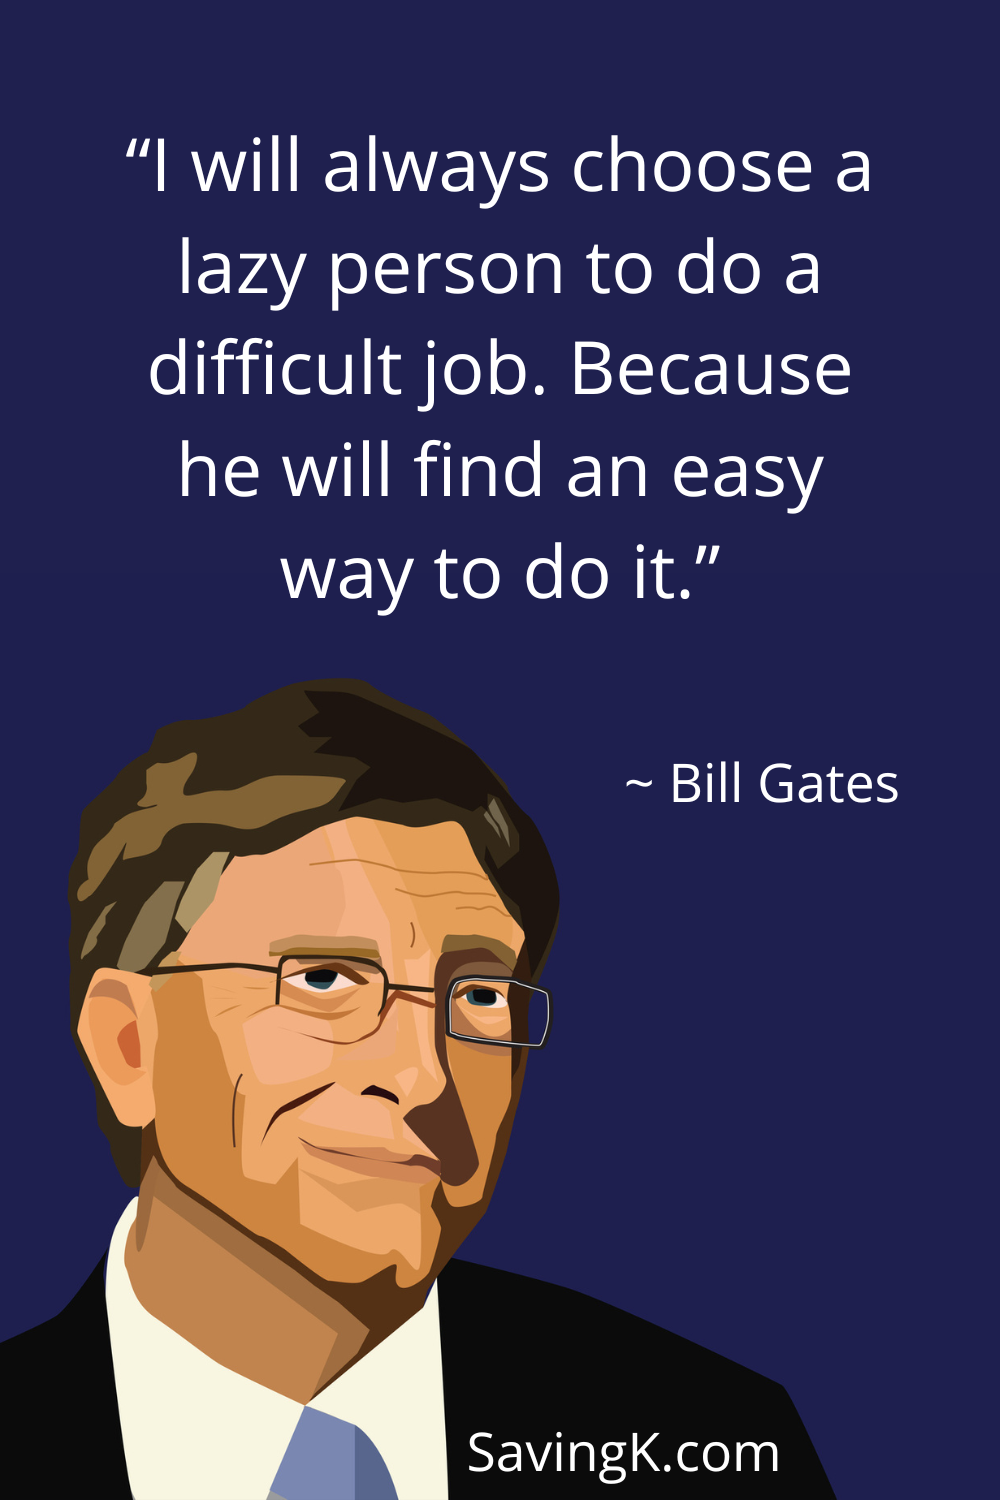 I will always choose a lazy person to do a difficult job. Because he will find an easy way to do it.